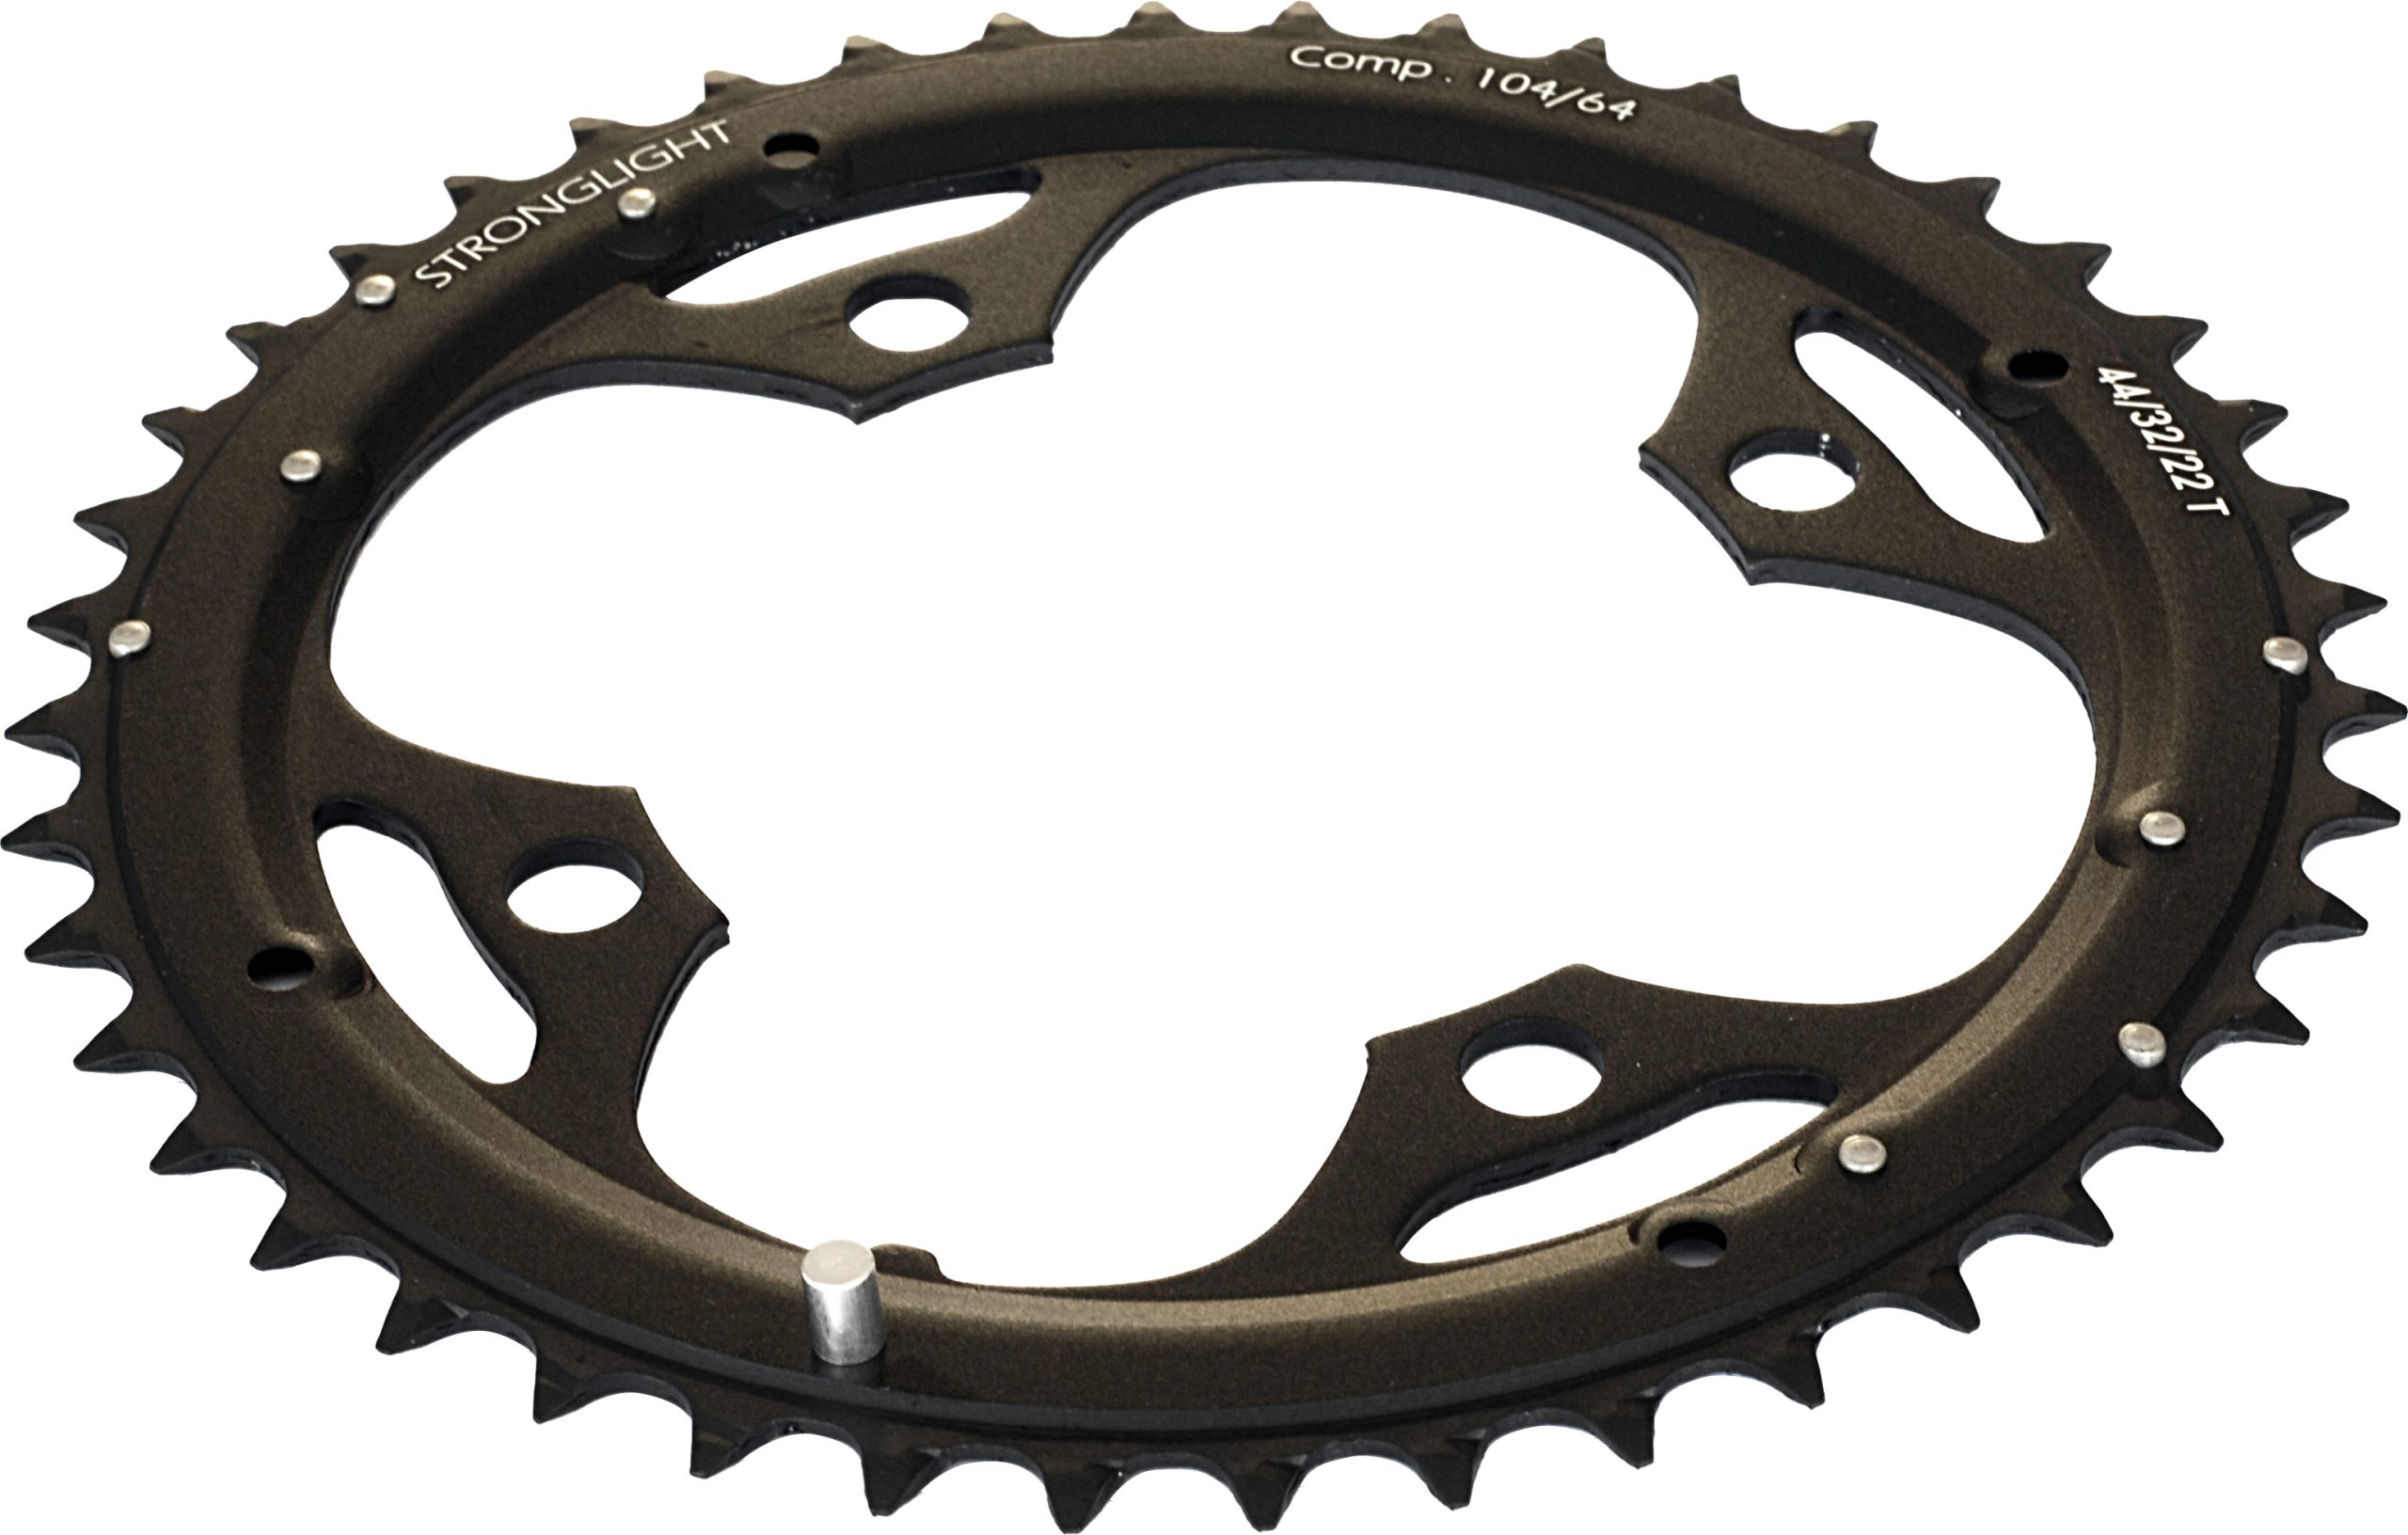 RXC104Z44 Stronglight 44T 4-Arm/104mm Chainring